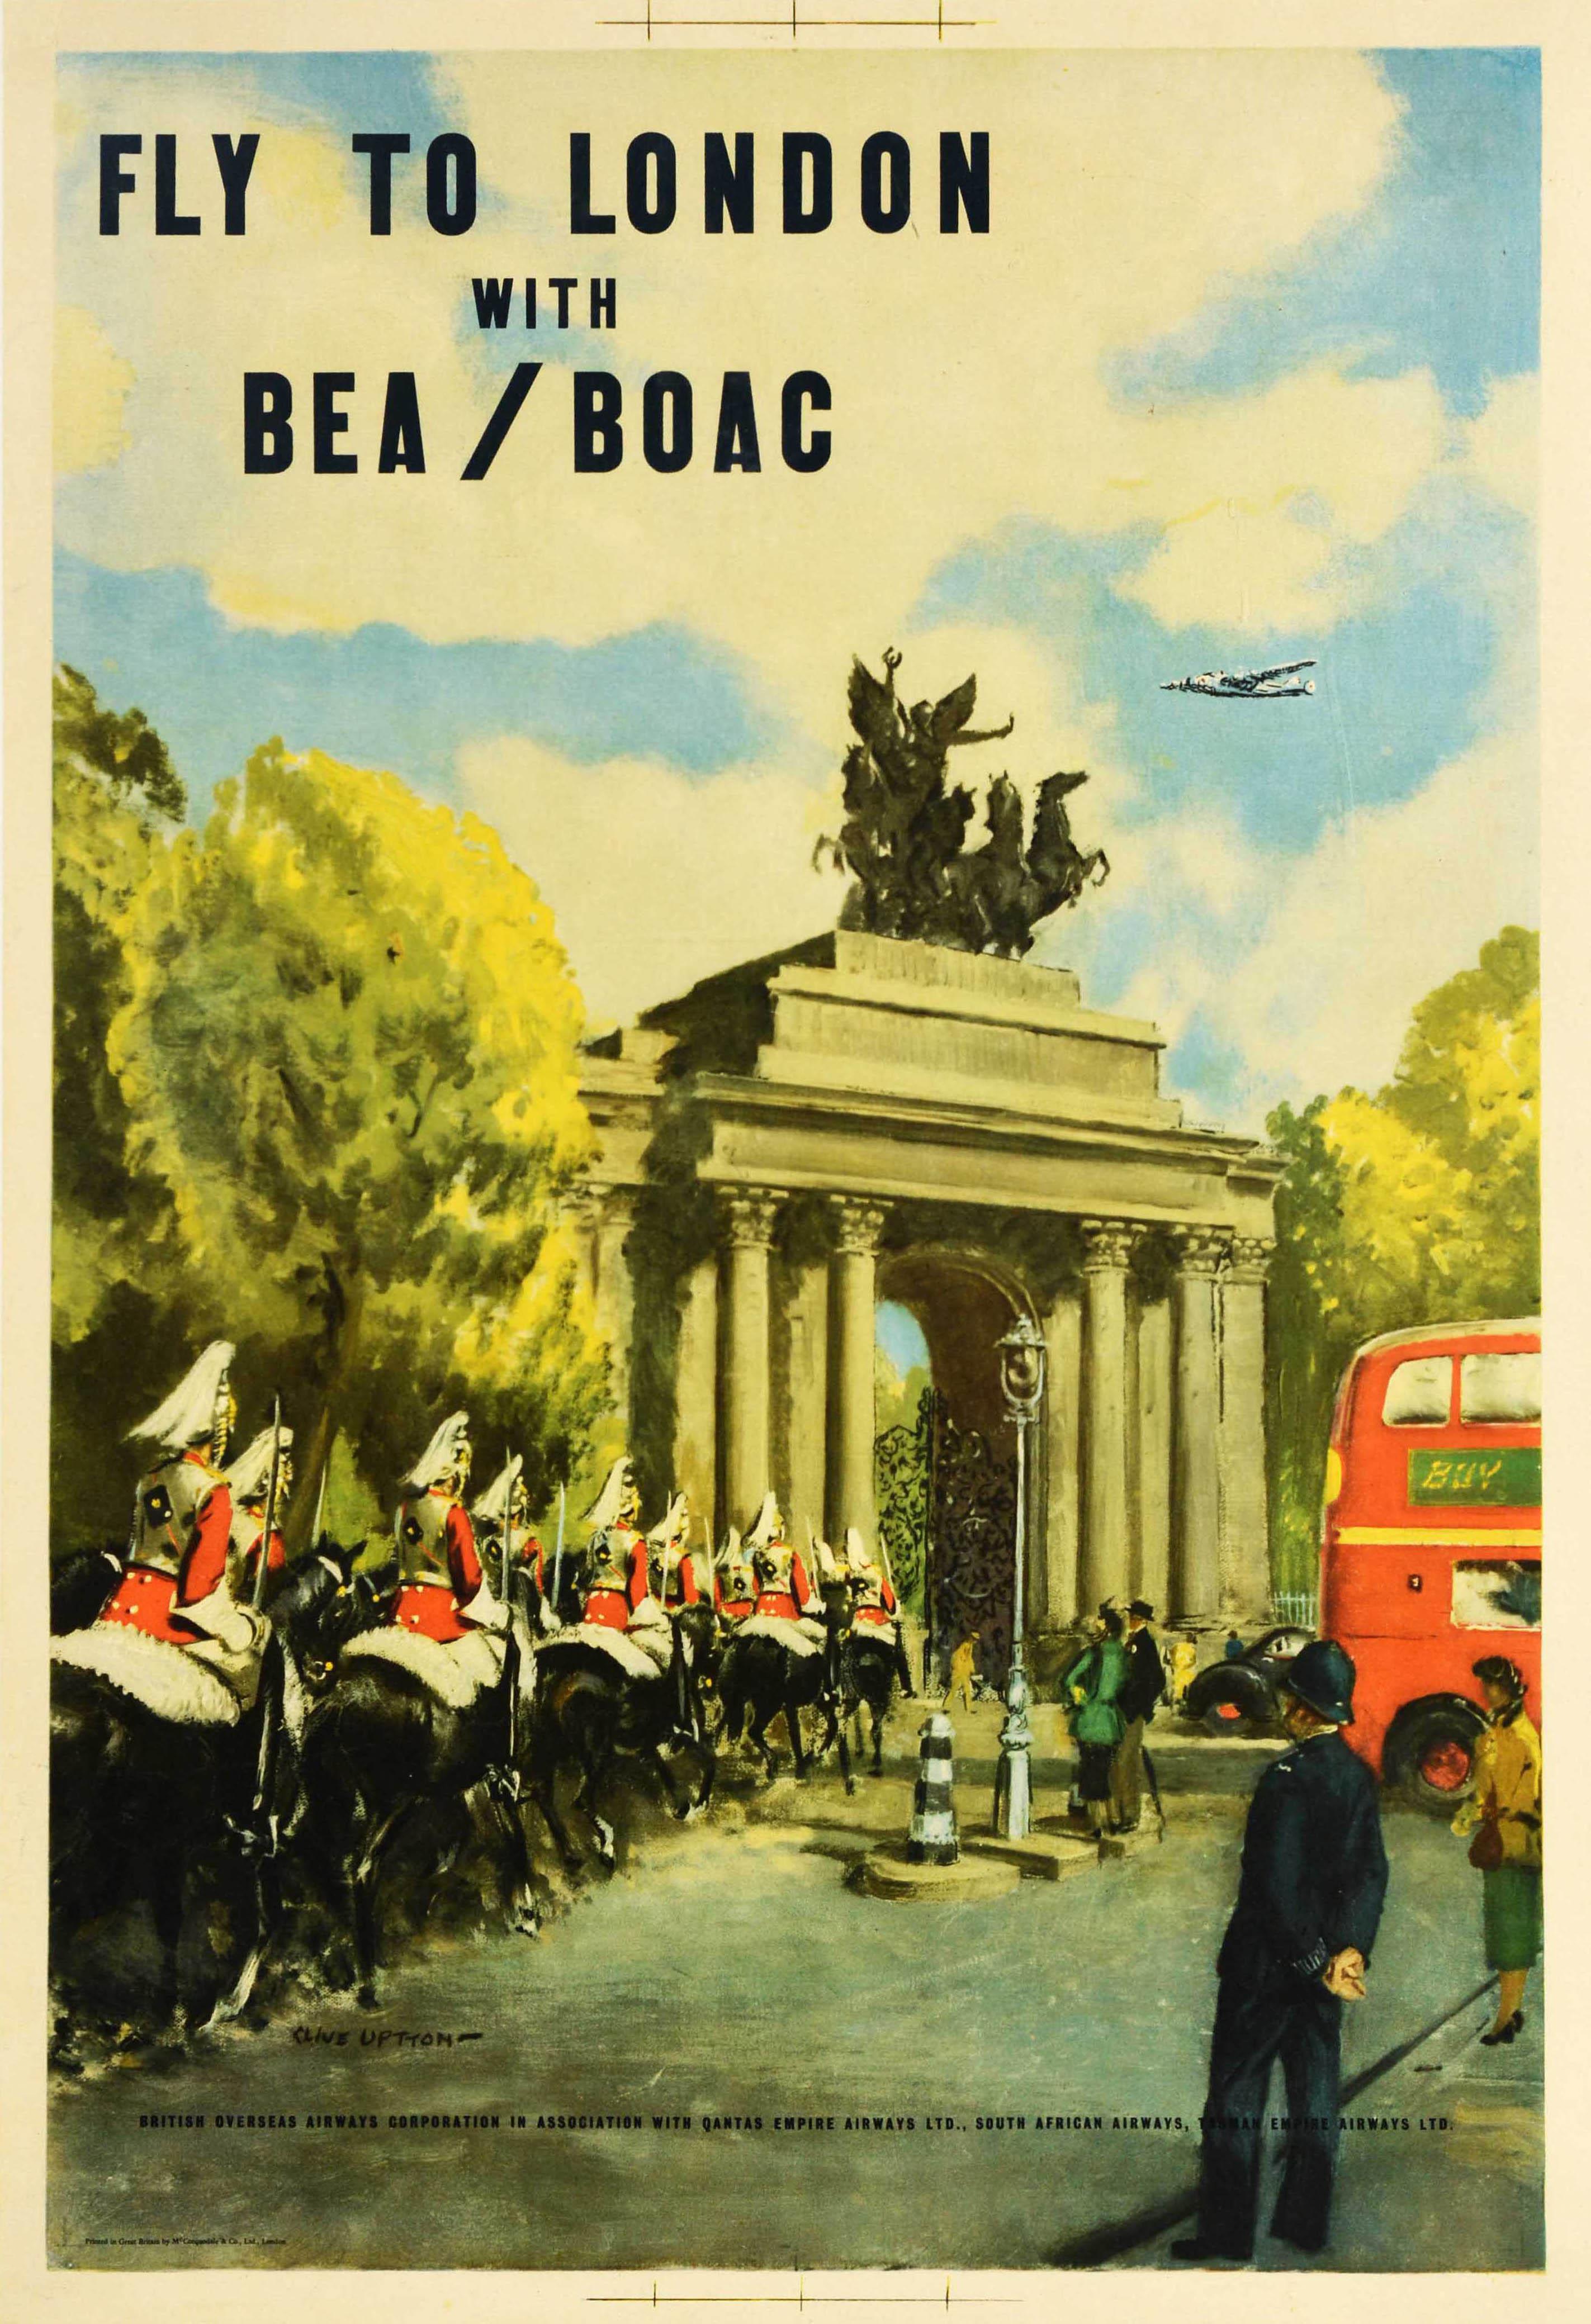 Clive Uptton Print - Original Vintage Travel Poster London Fly BEA BOAC Wellington Arch Horse Guards